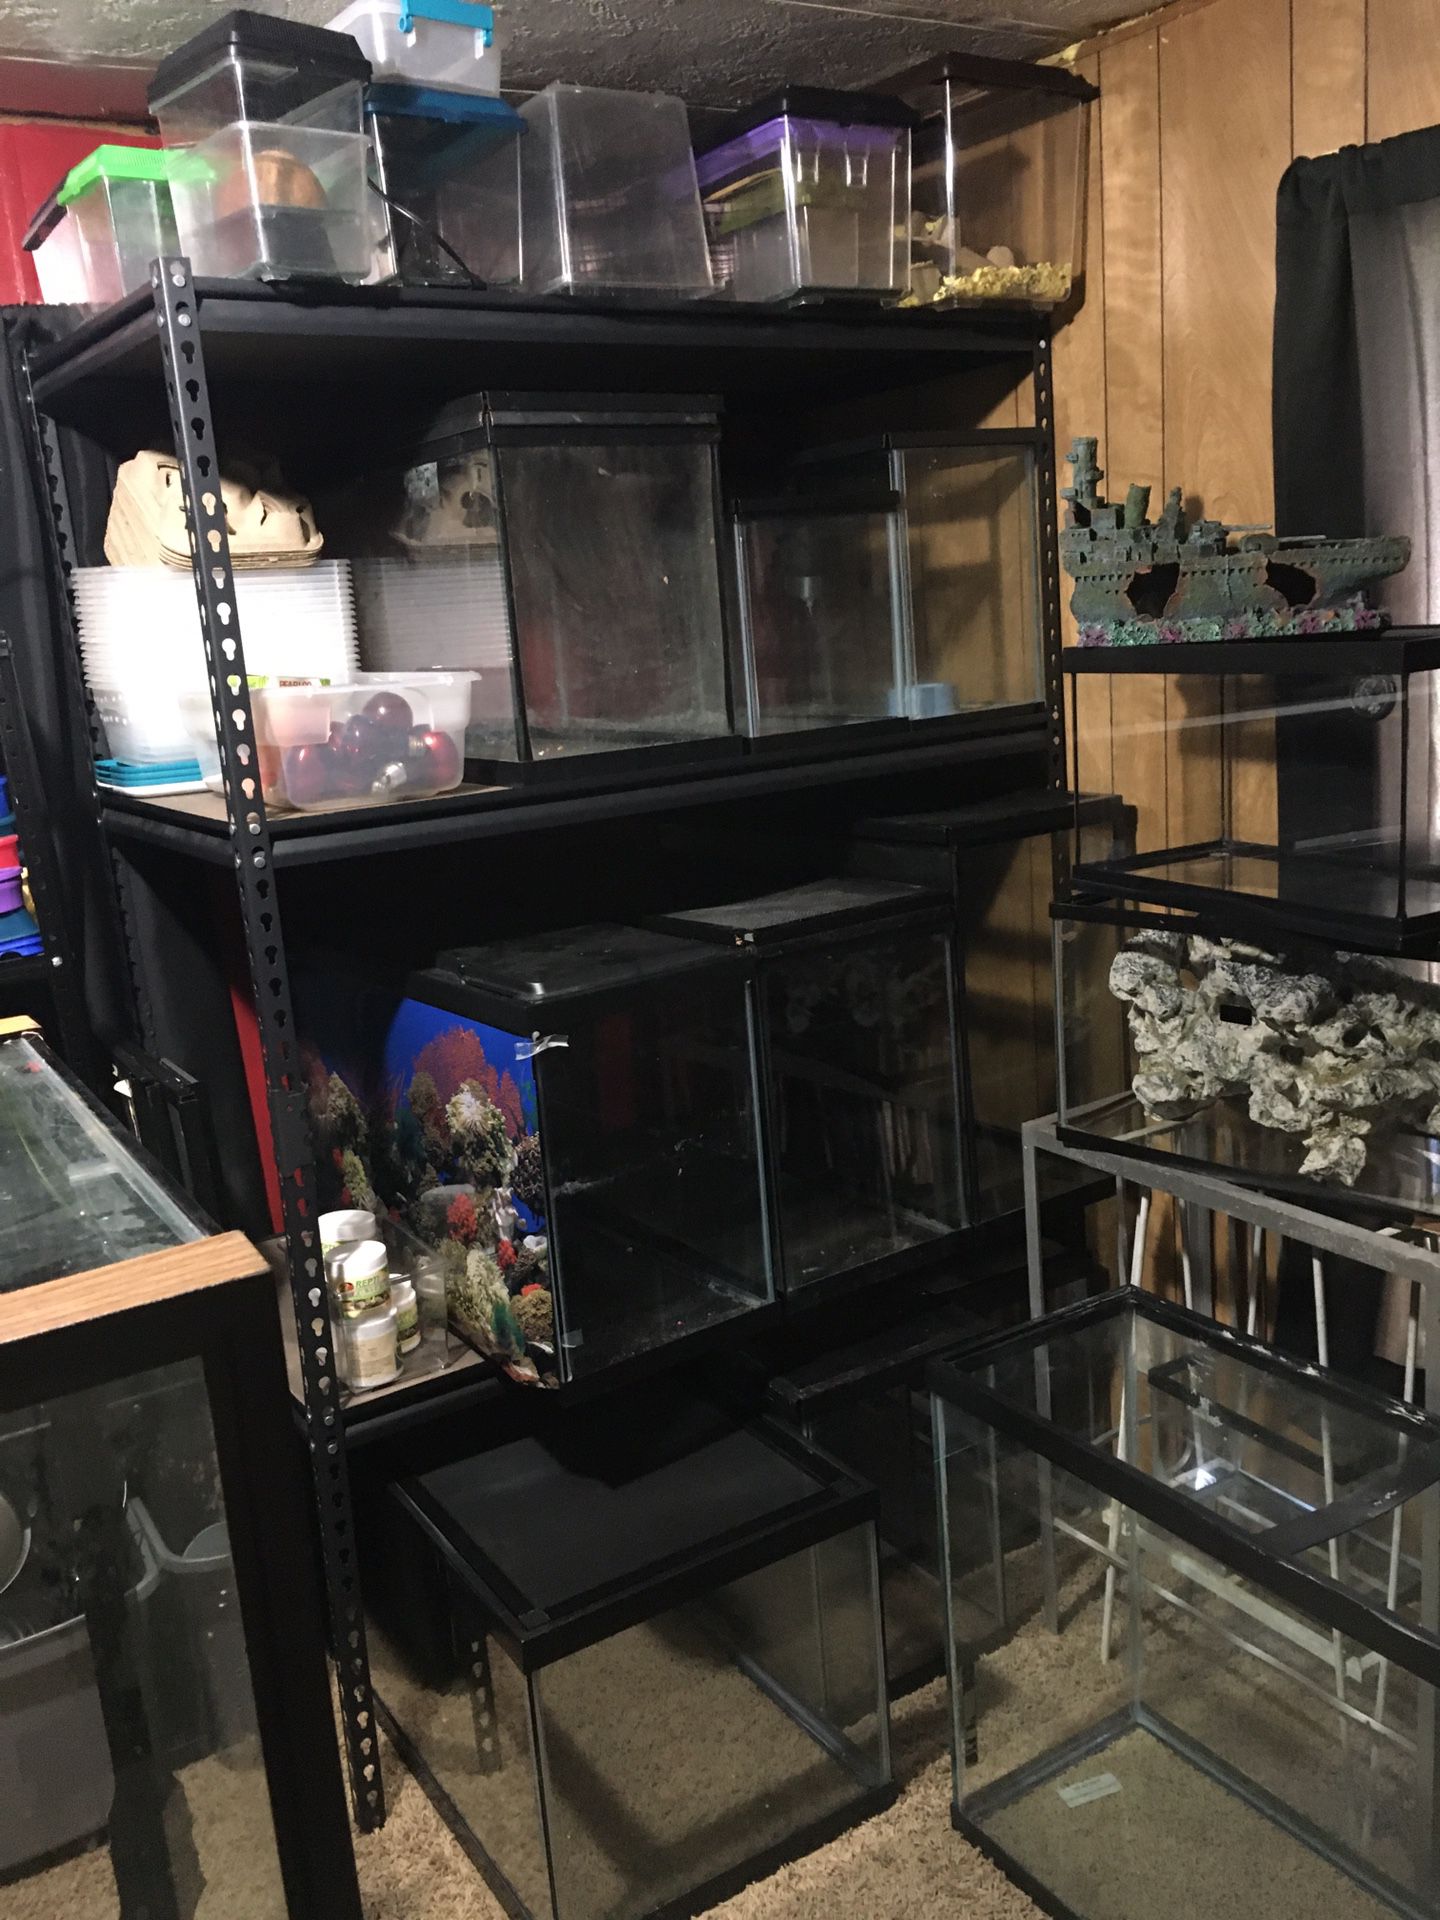 Fish and reptile tanks, stands and supplies